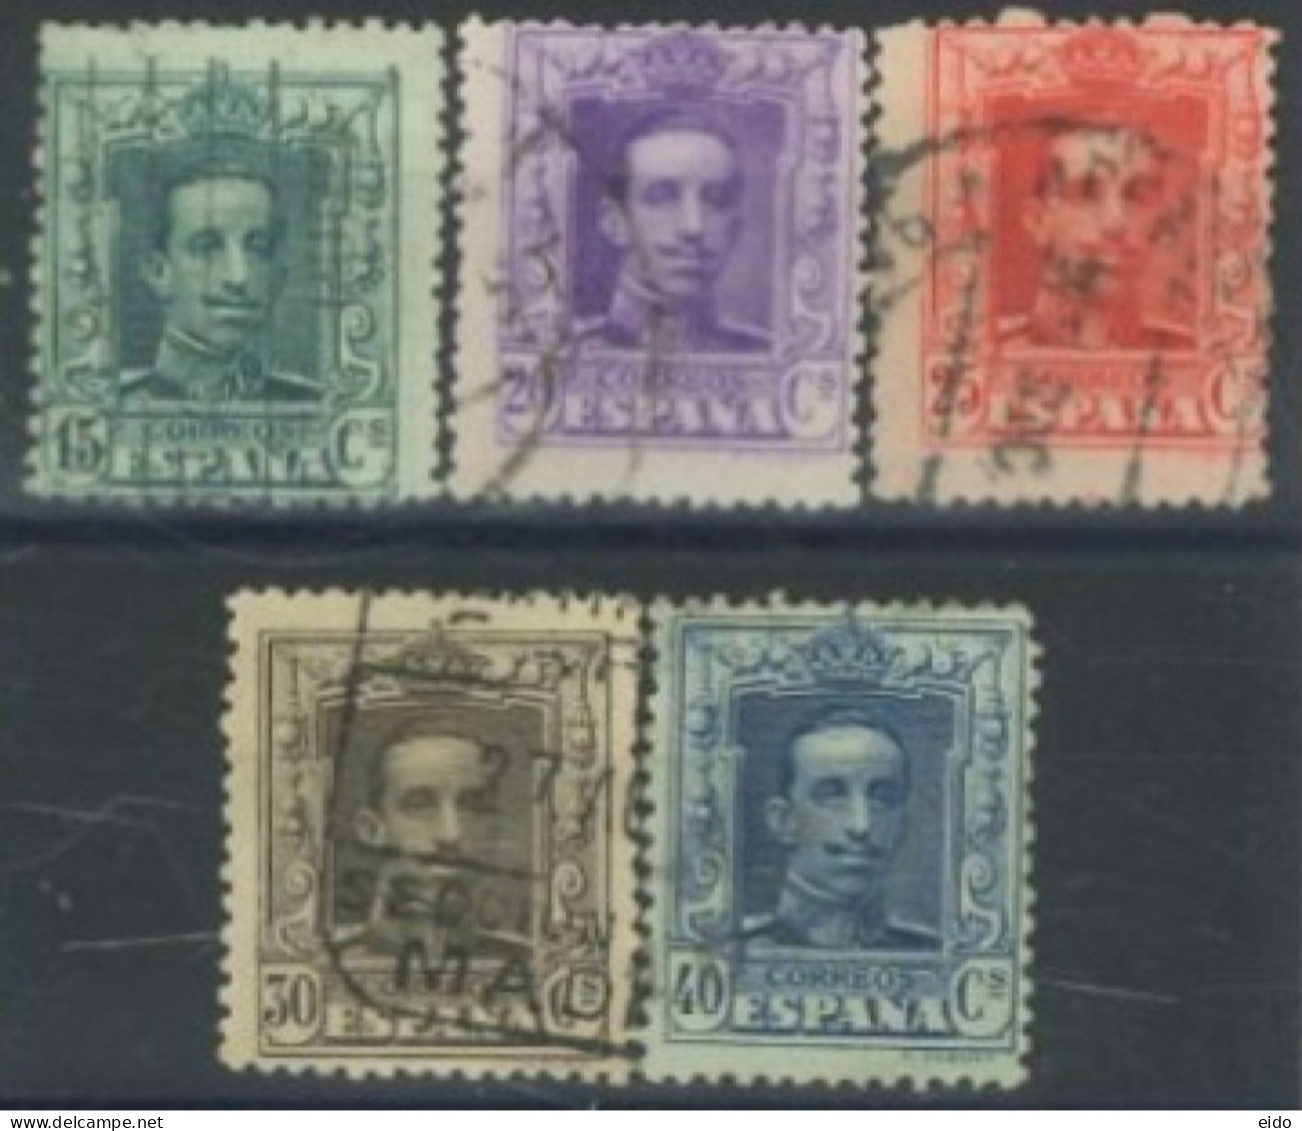 SPAIN, 1922/26, KING ALFONSO XIII STAMPS SET OF 5 # 336/40, USED. - Used Stamps